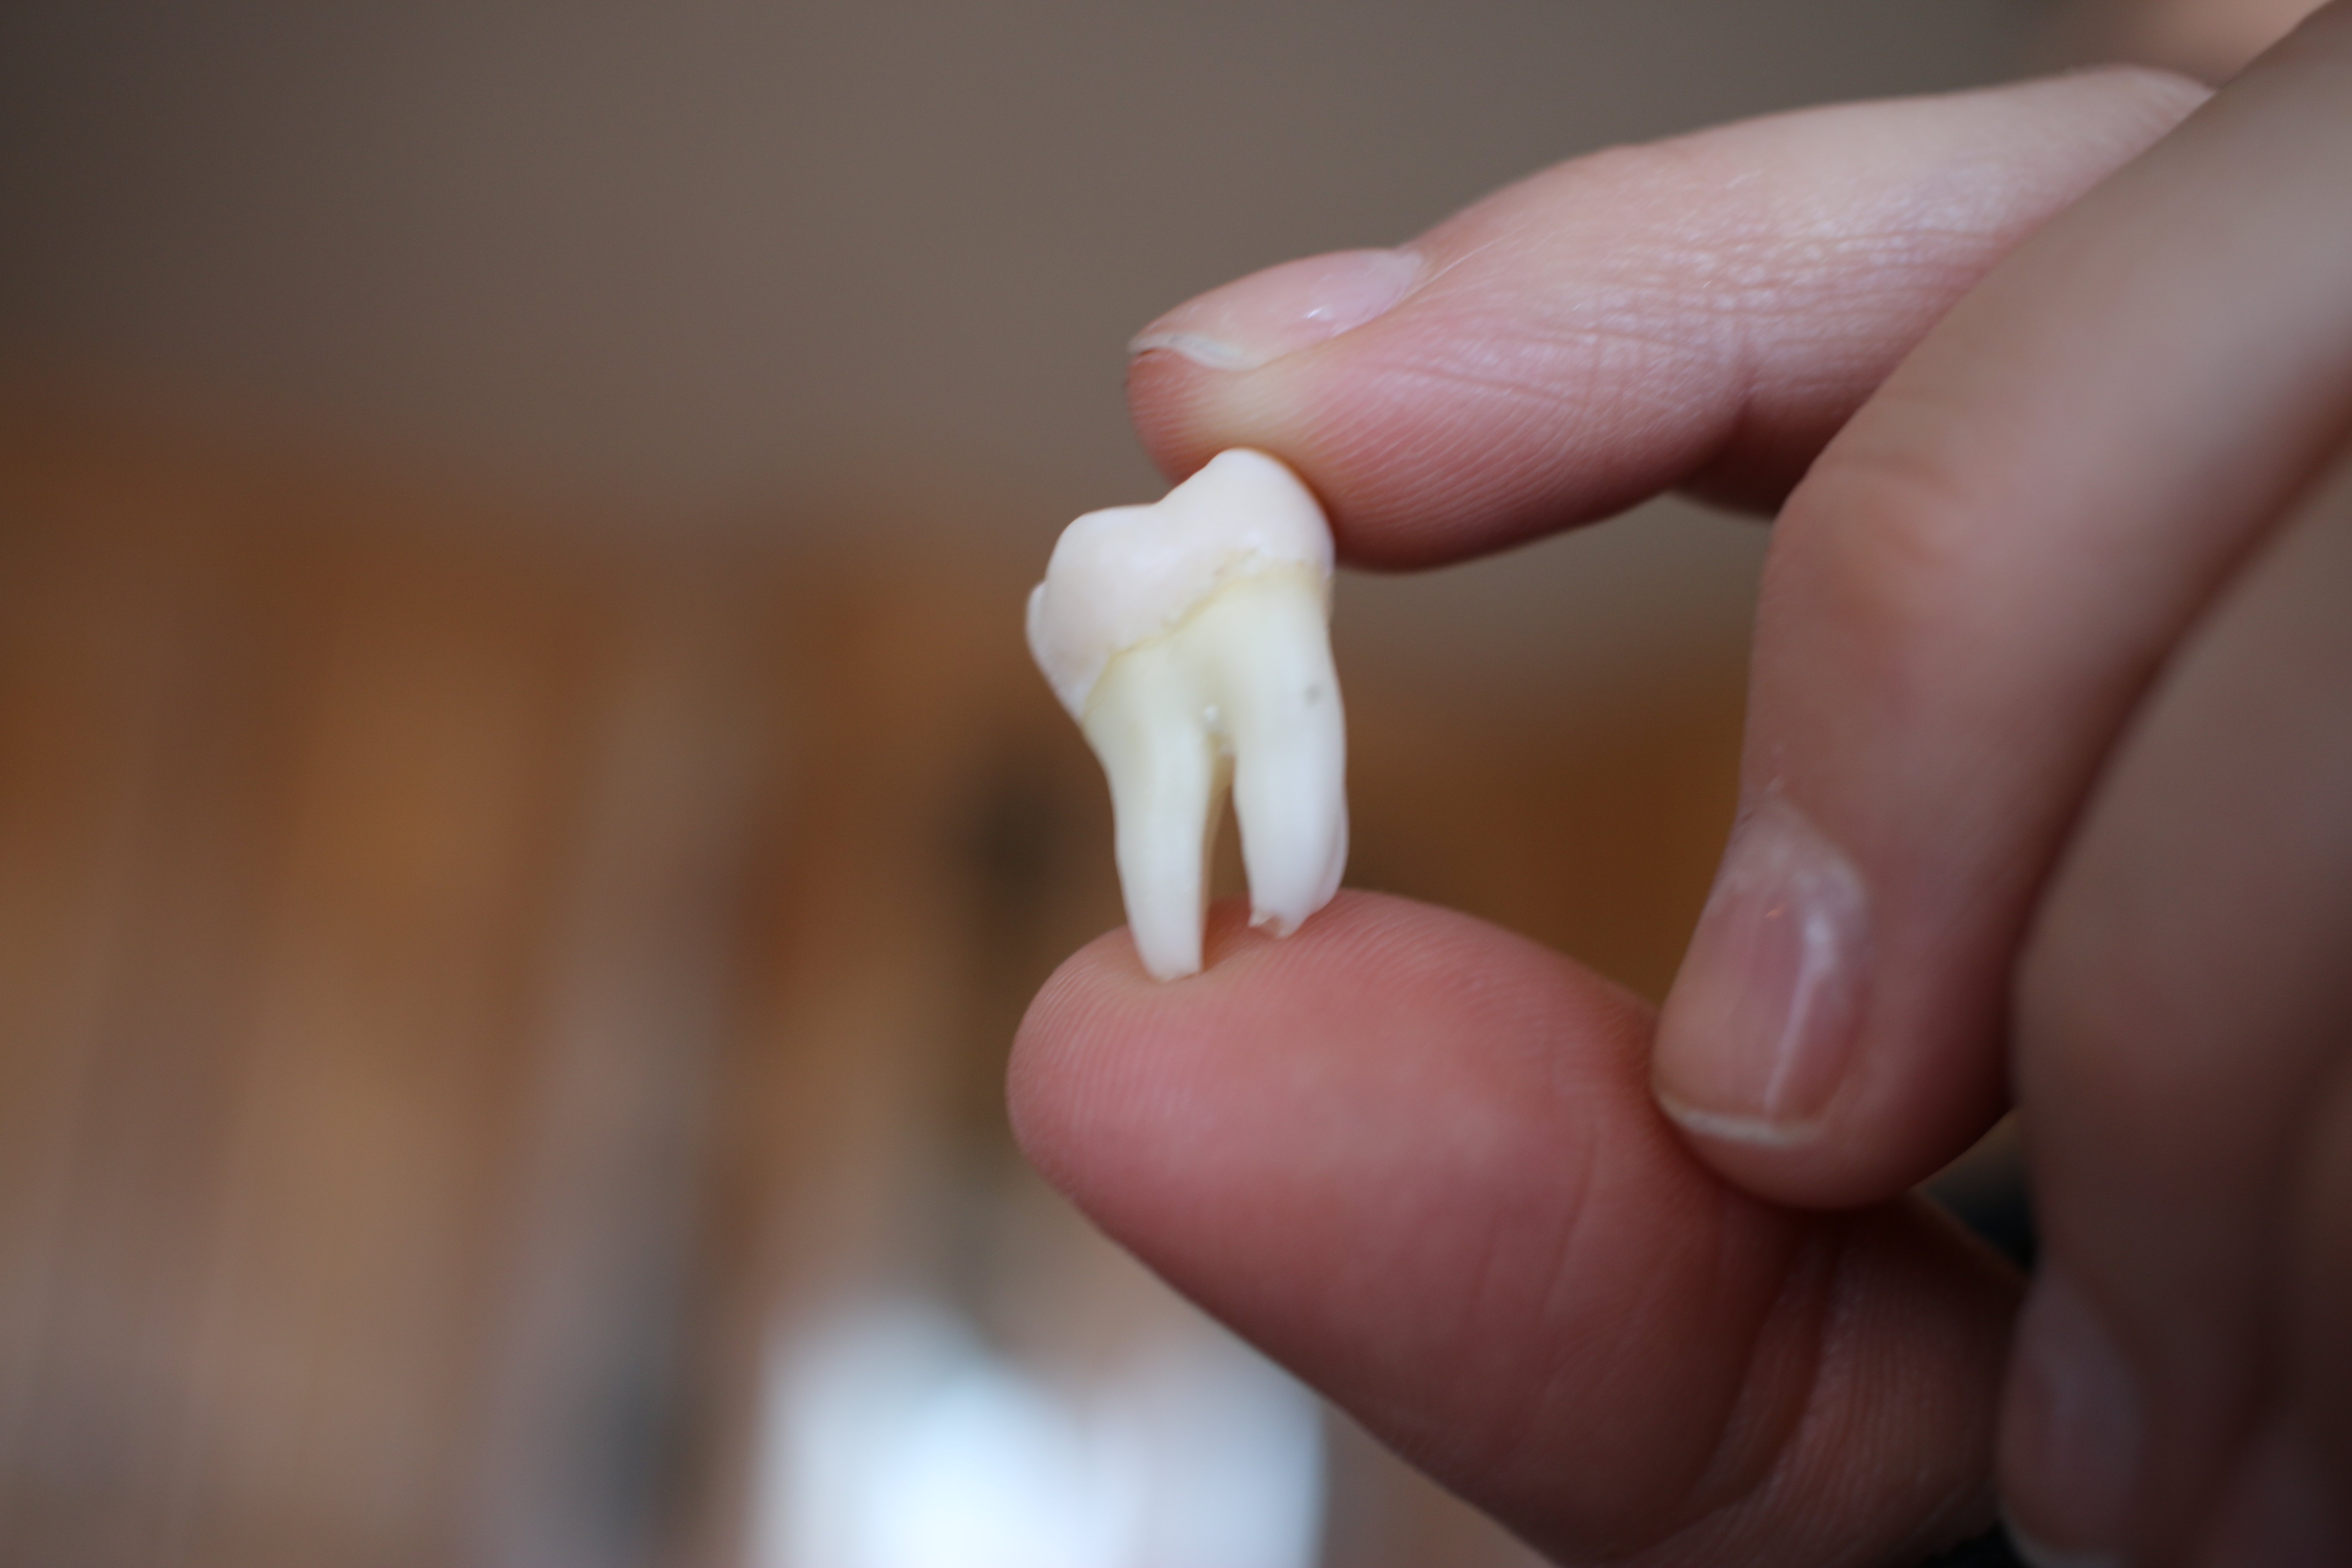 image-of-an-extracted-wisdom-tooth-K3P8B6S